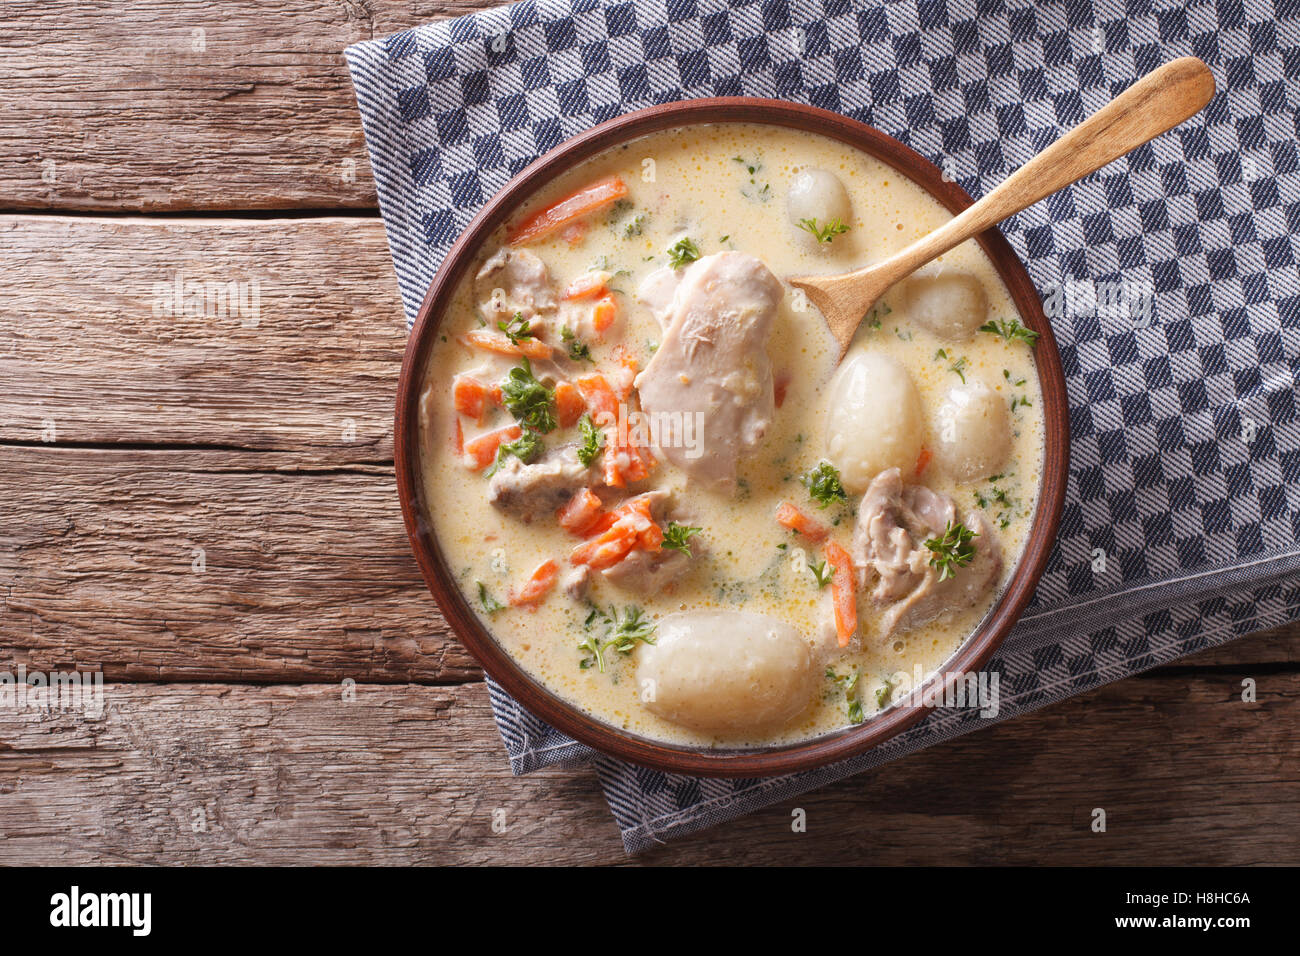 Creamy soup with chicken and vegetables close up in a bowl on the table. Horizontal view from above Stock Photo